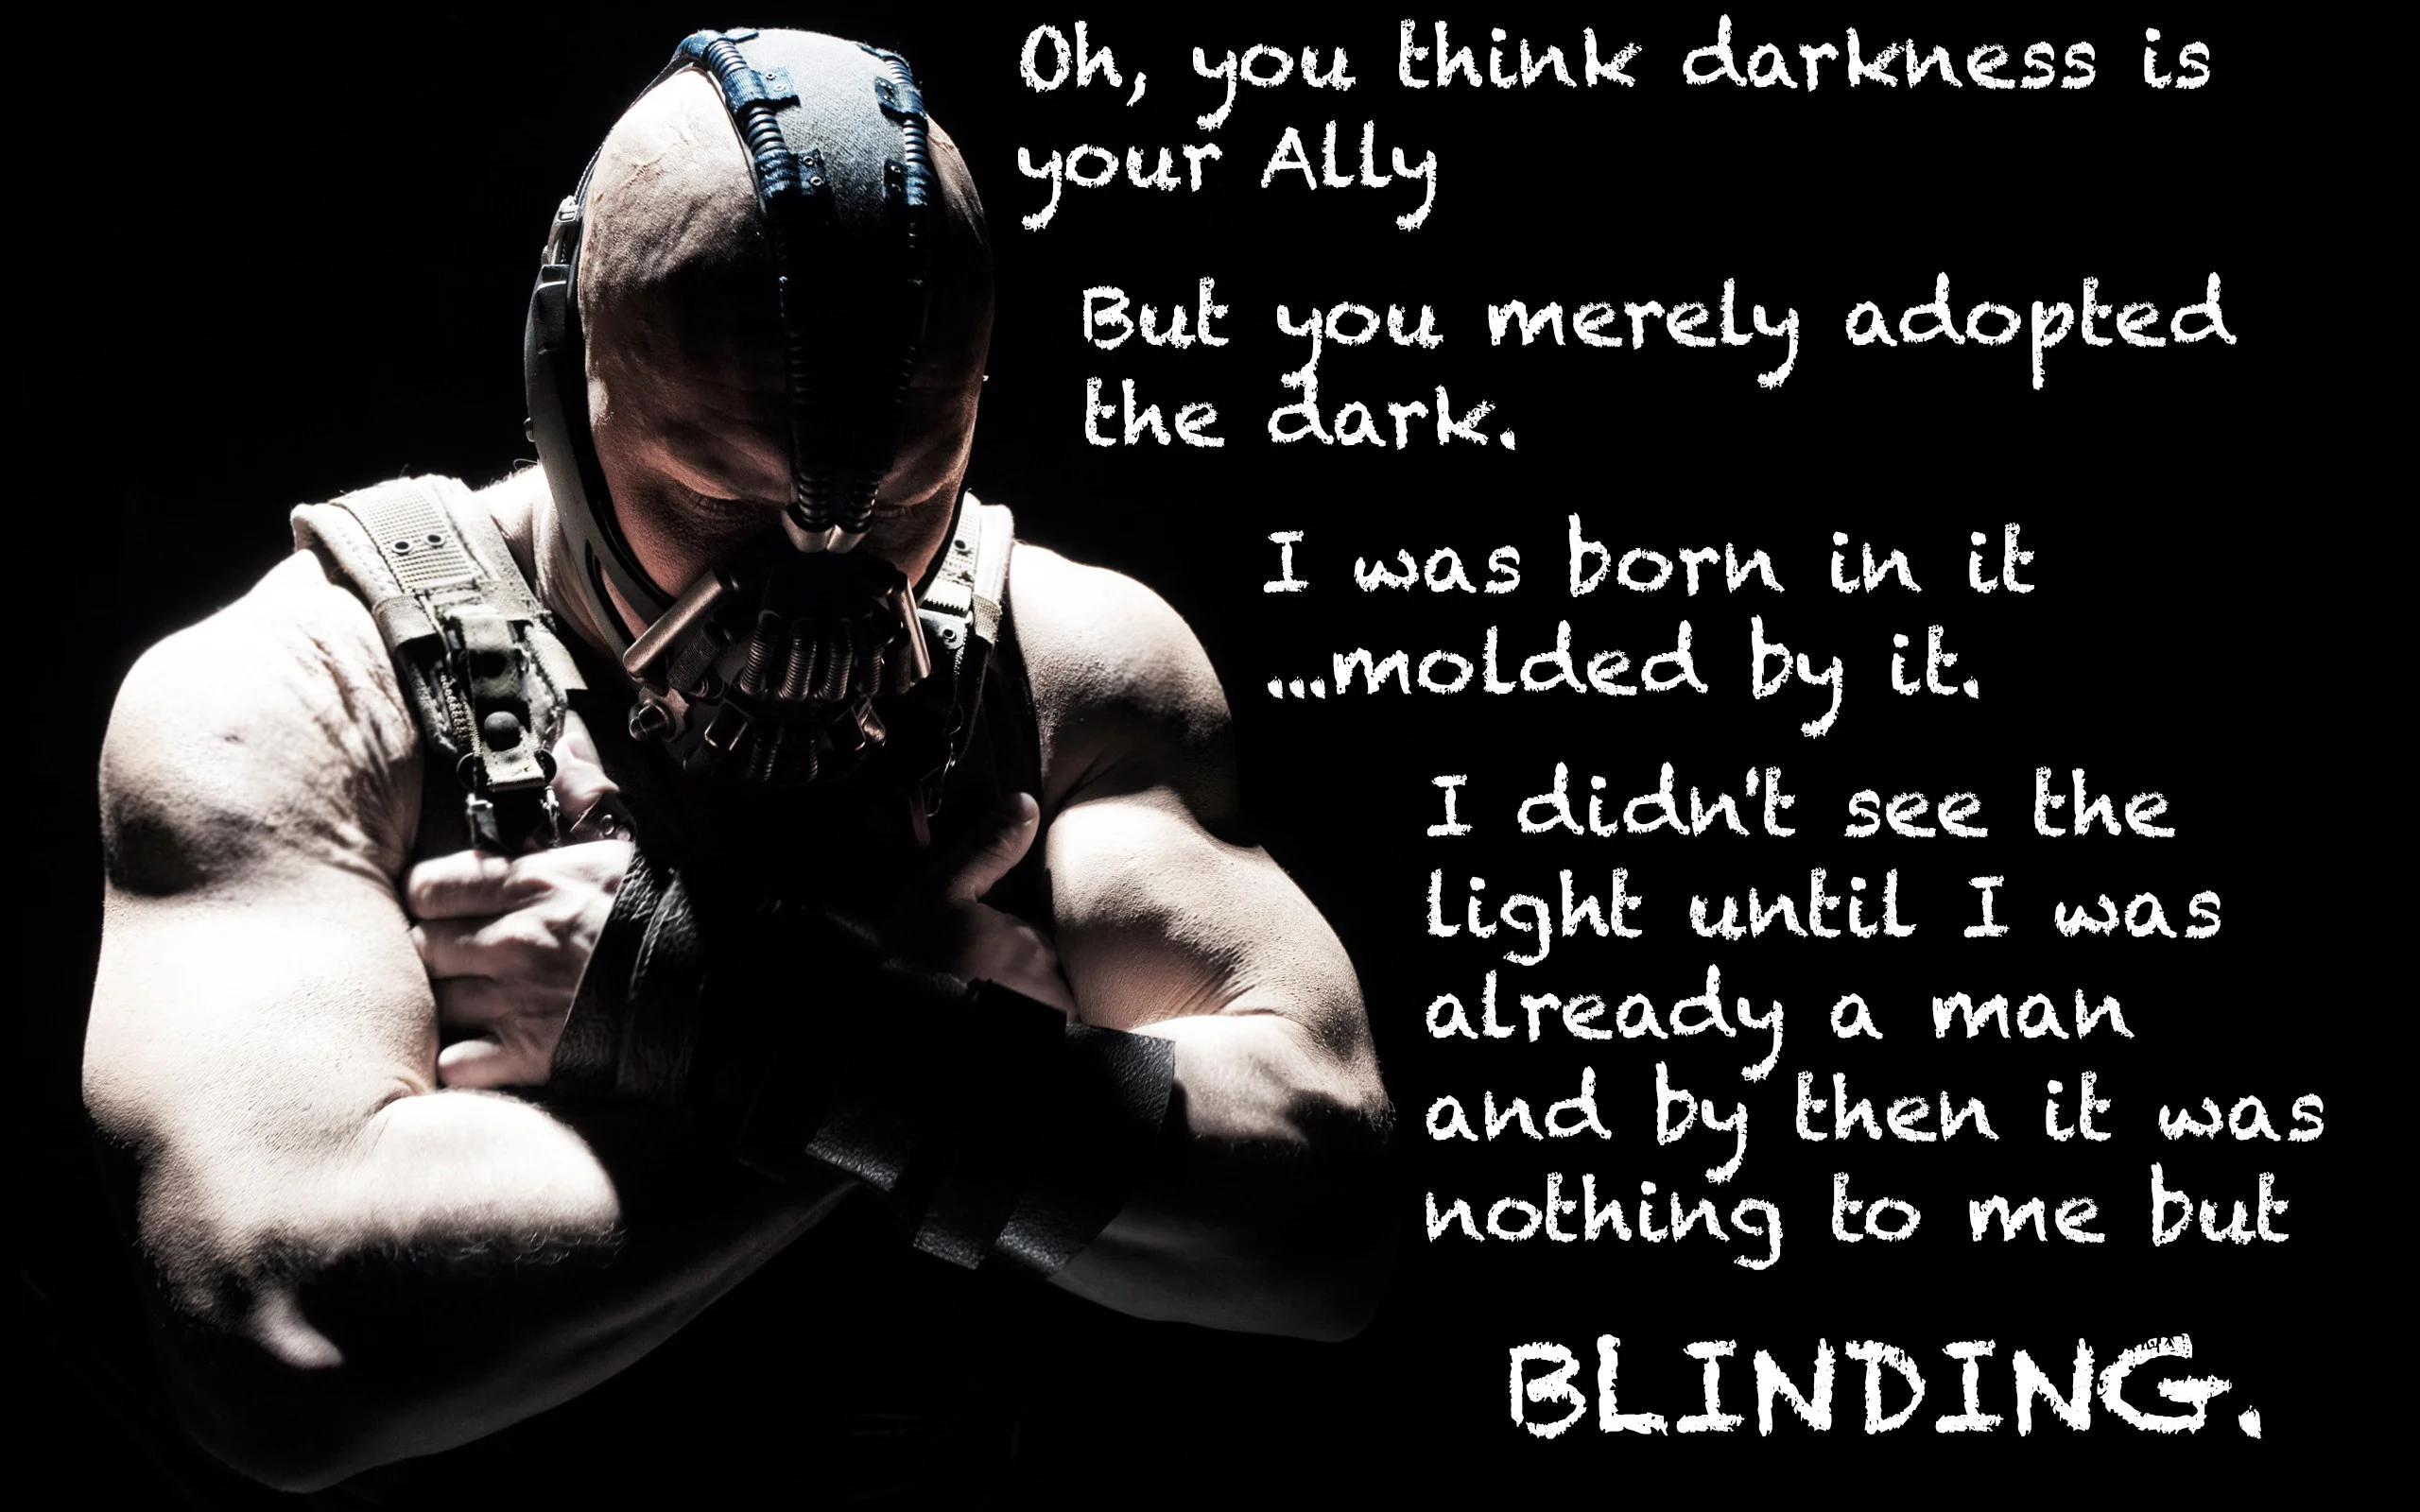 Bane quote wallpaper (can someone make it more badass?)